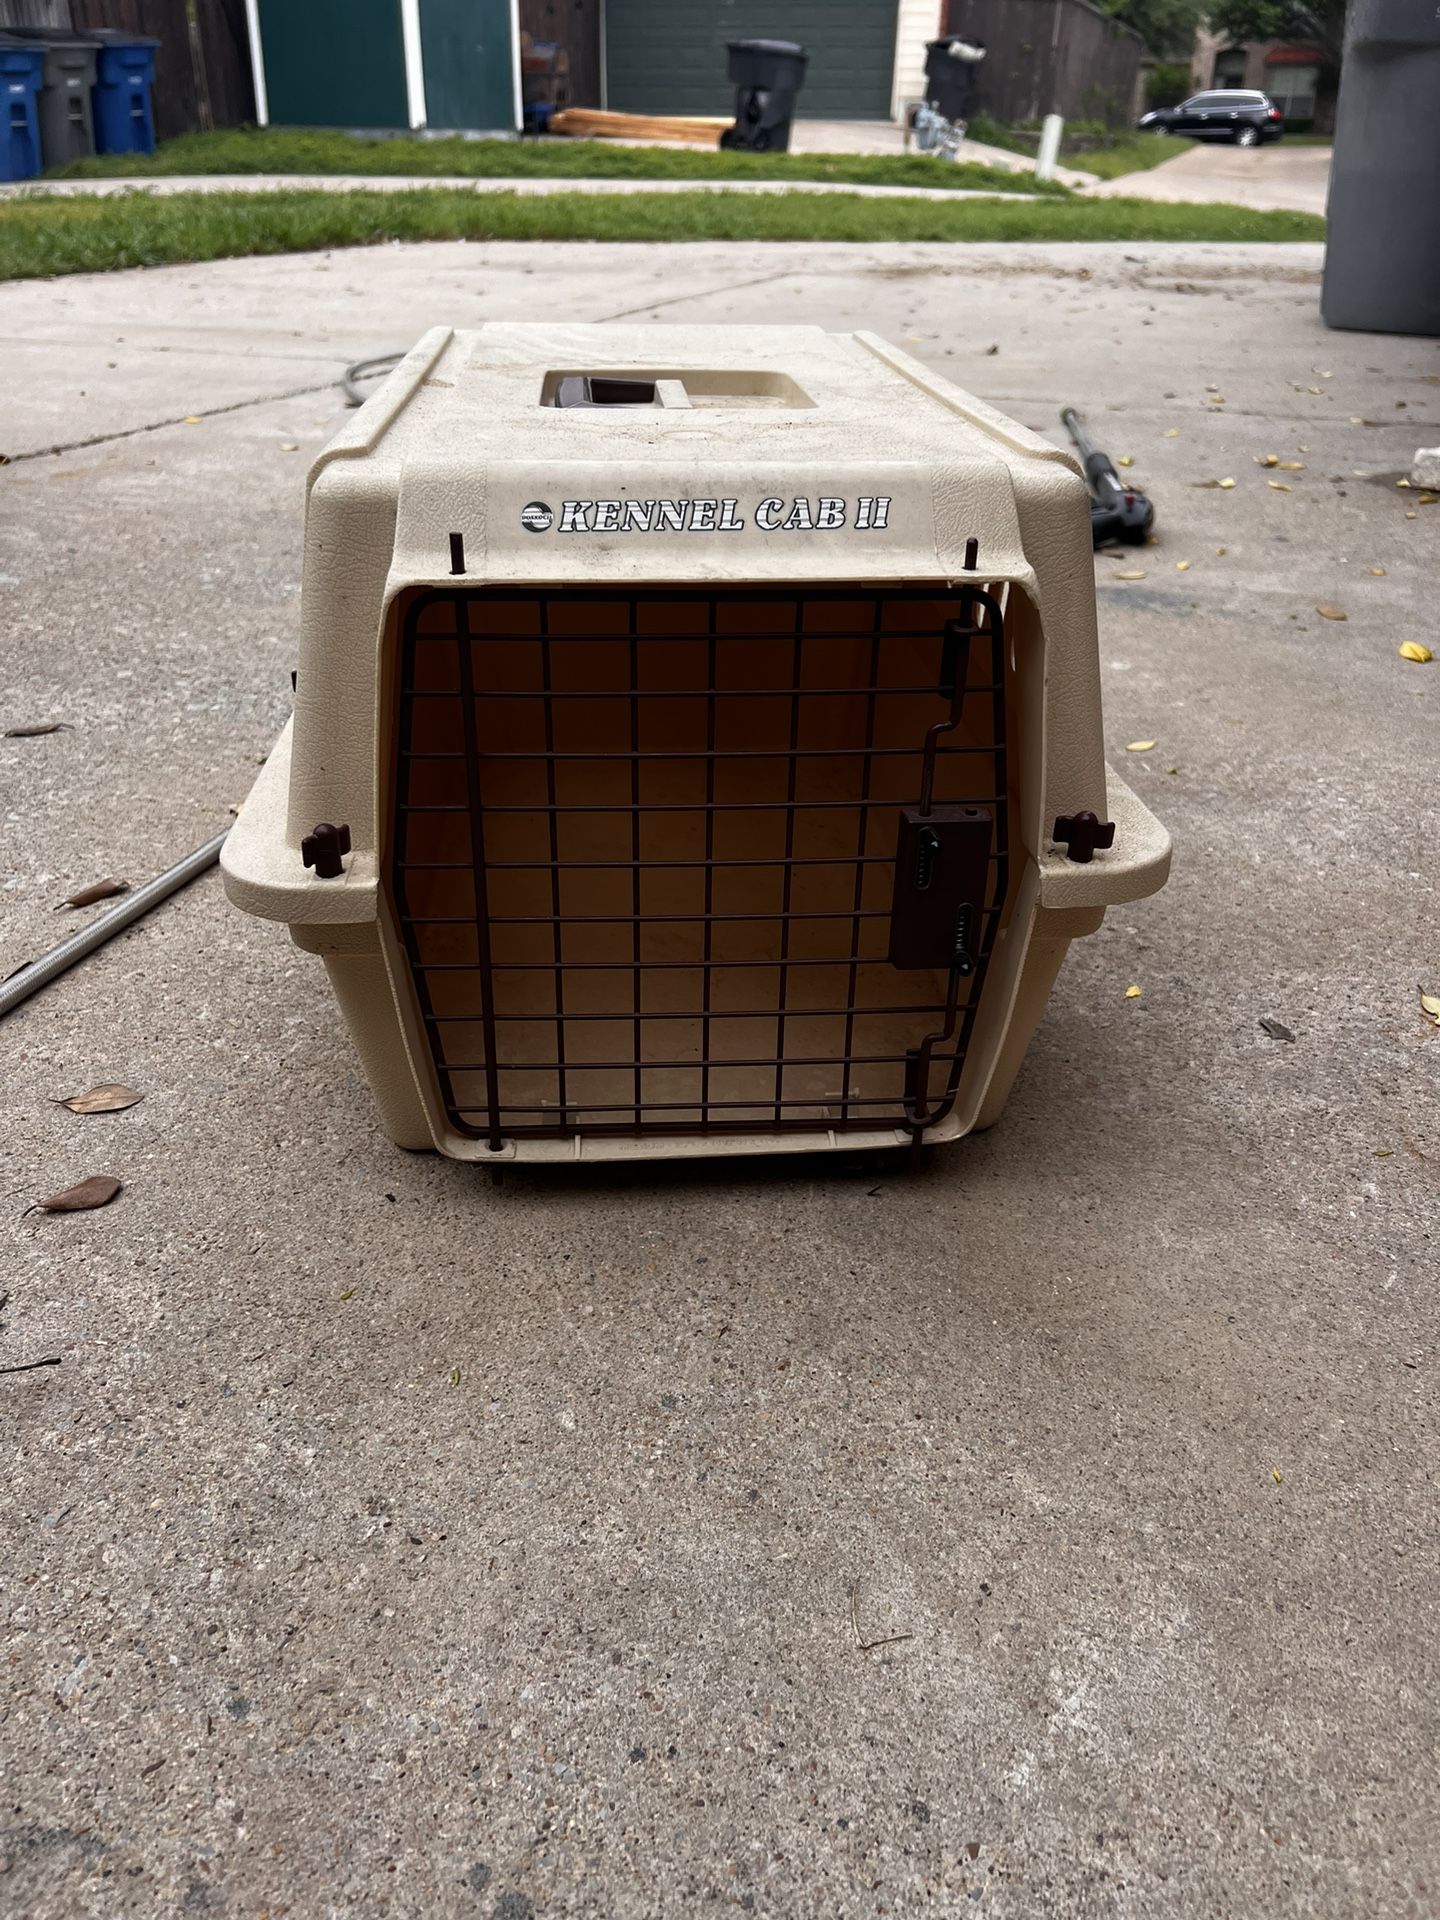 Small Pet carrier